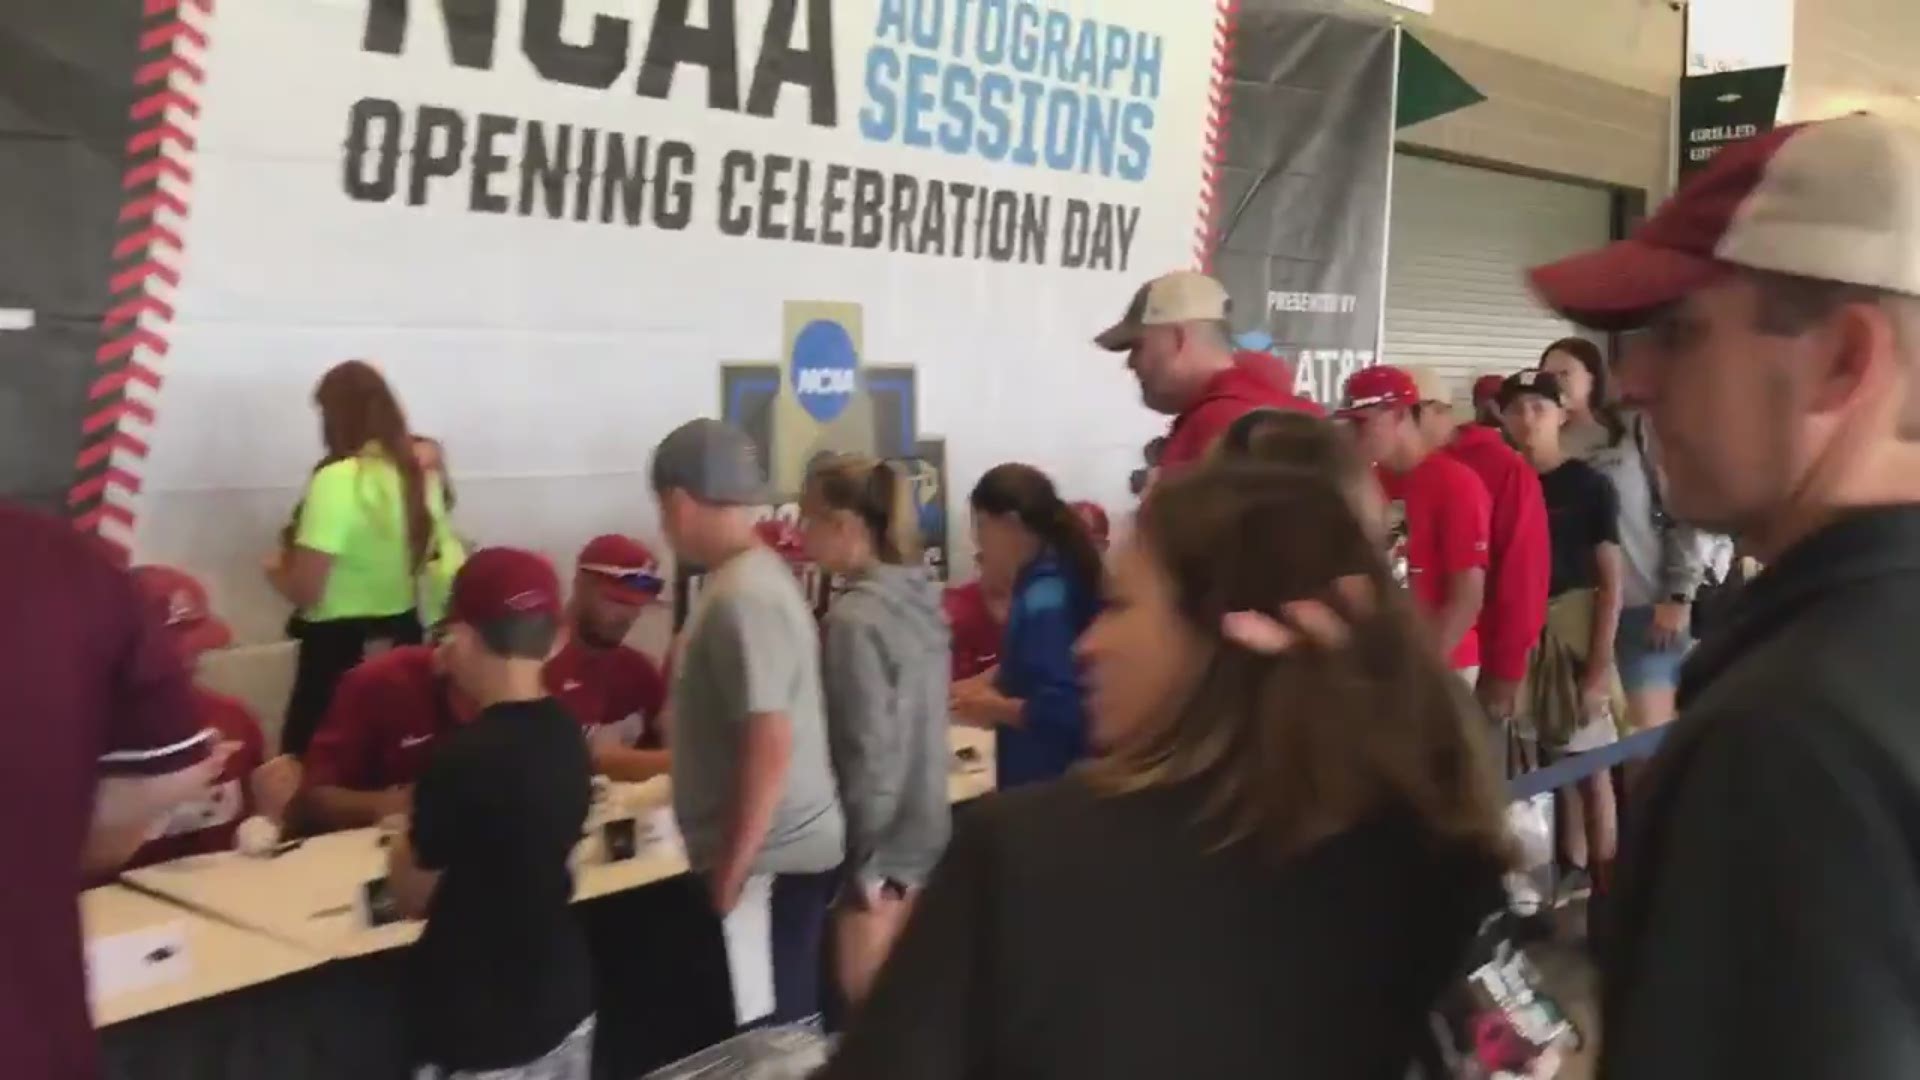 The autograph line for the Razorbacks baseball team in Omaha is quite impressive!